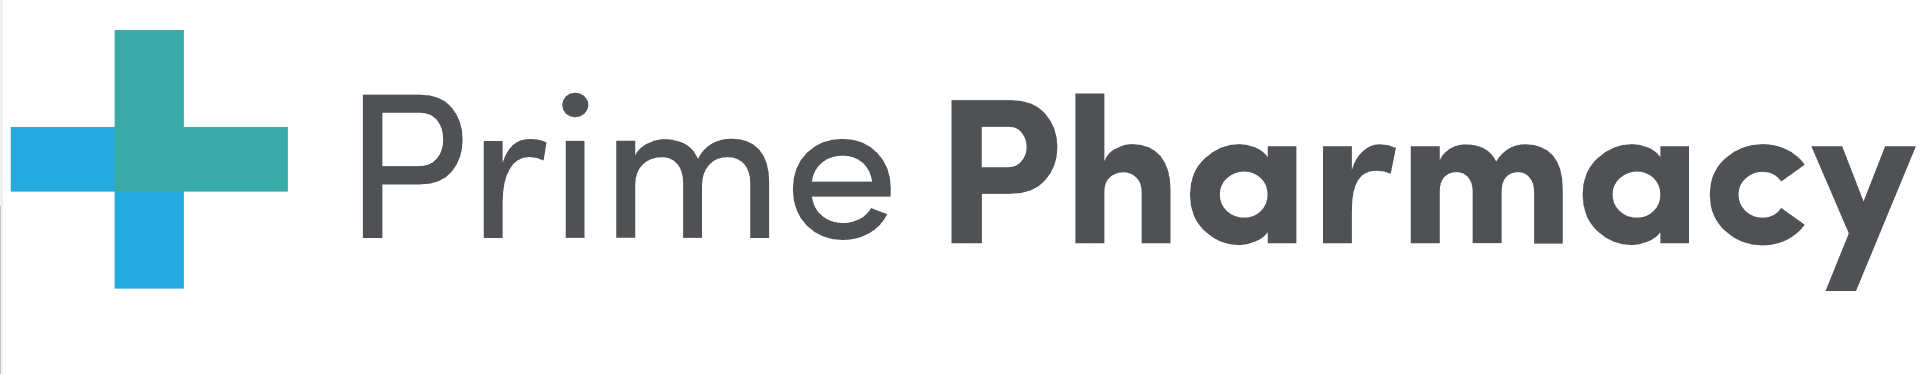 Logo of Prime Pharmacy Chemists And Pharmacists In Bolton, Greater Manchester